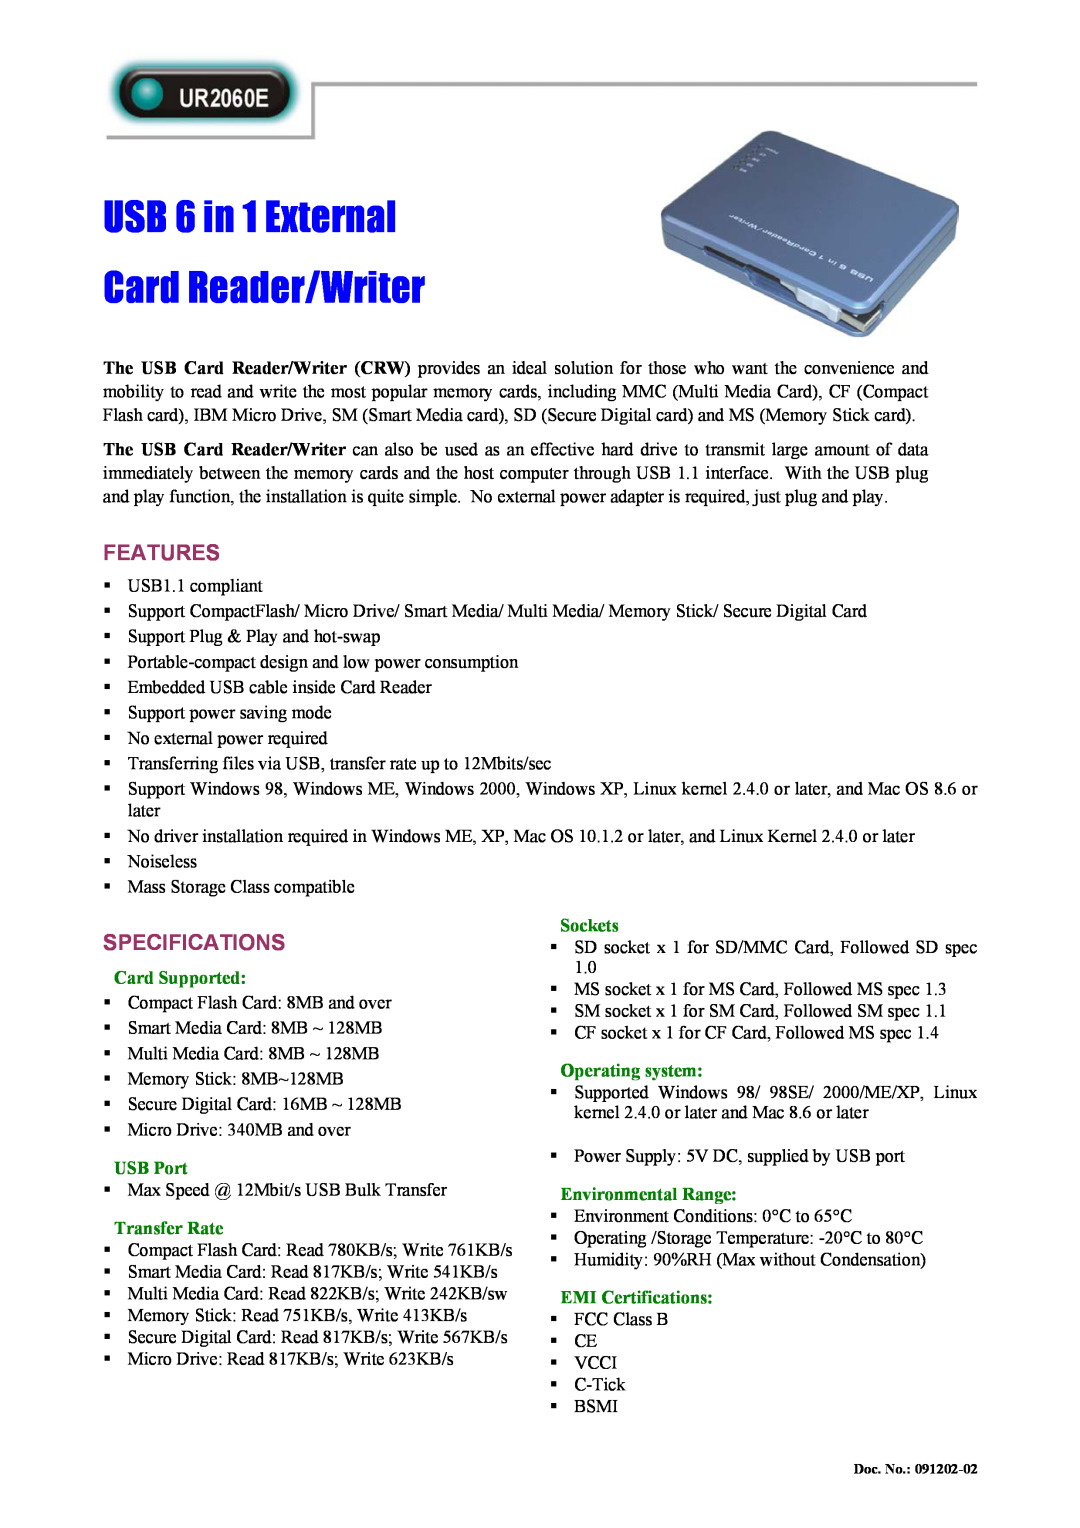 Abocom UR2060 specifications USB 6 in 1 External Card Reader/Writer, Features, Specifications, Sockets, Card Supported 